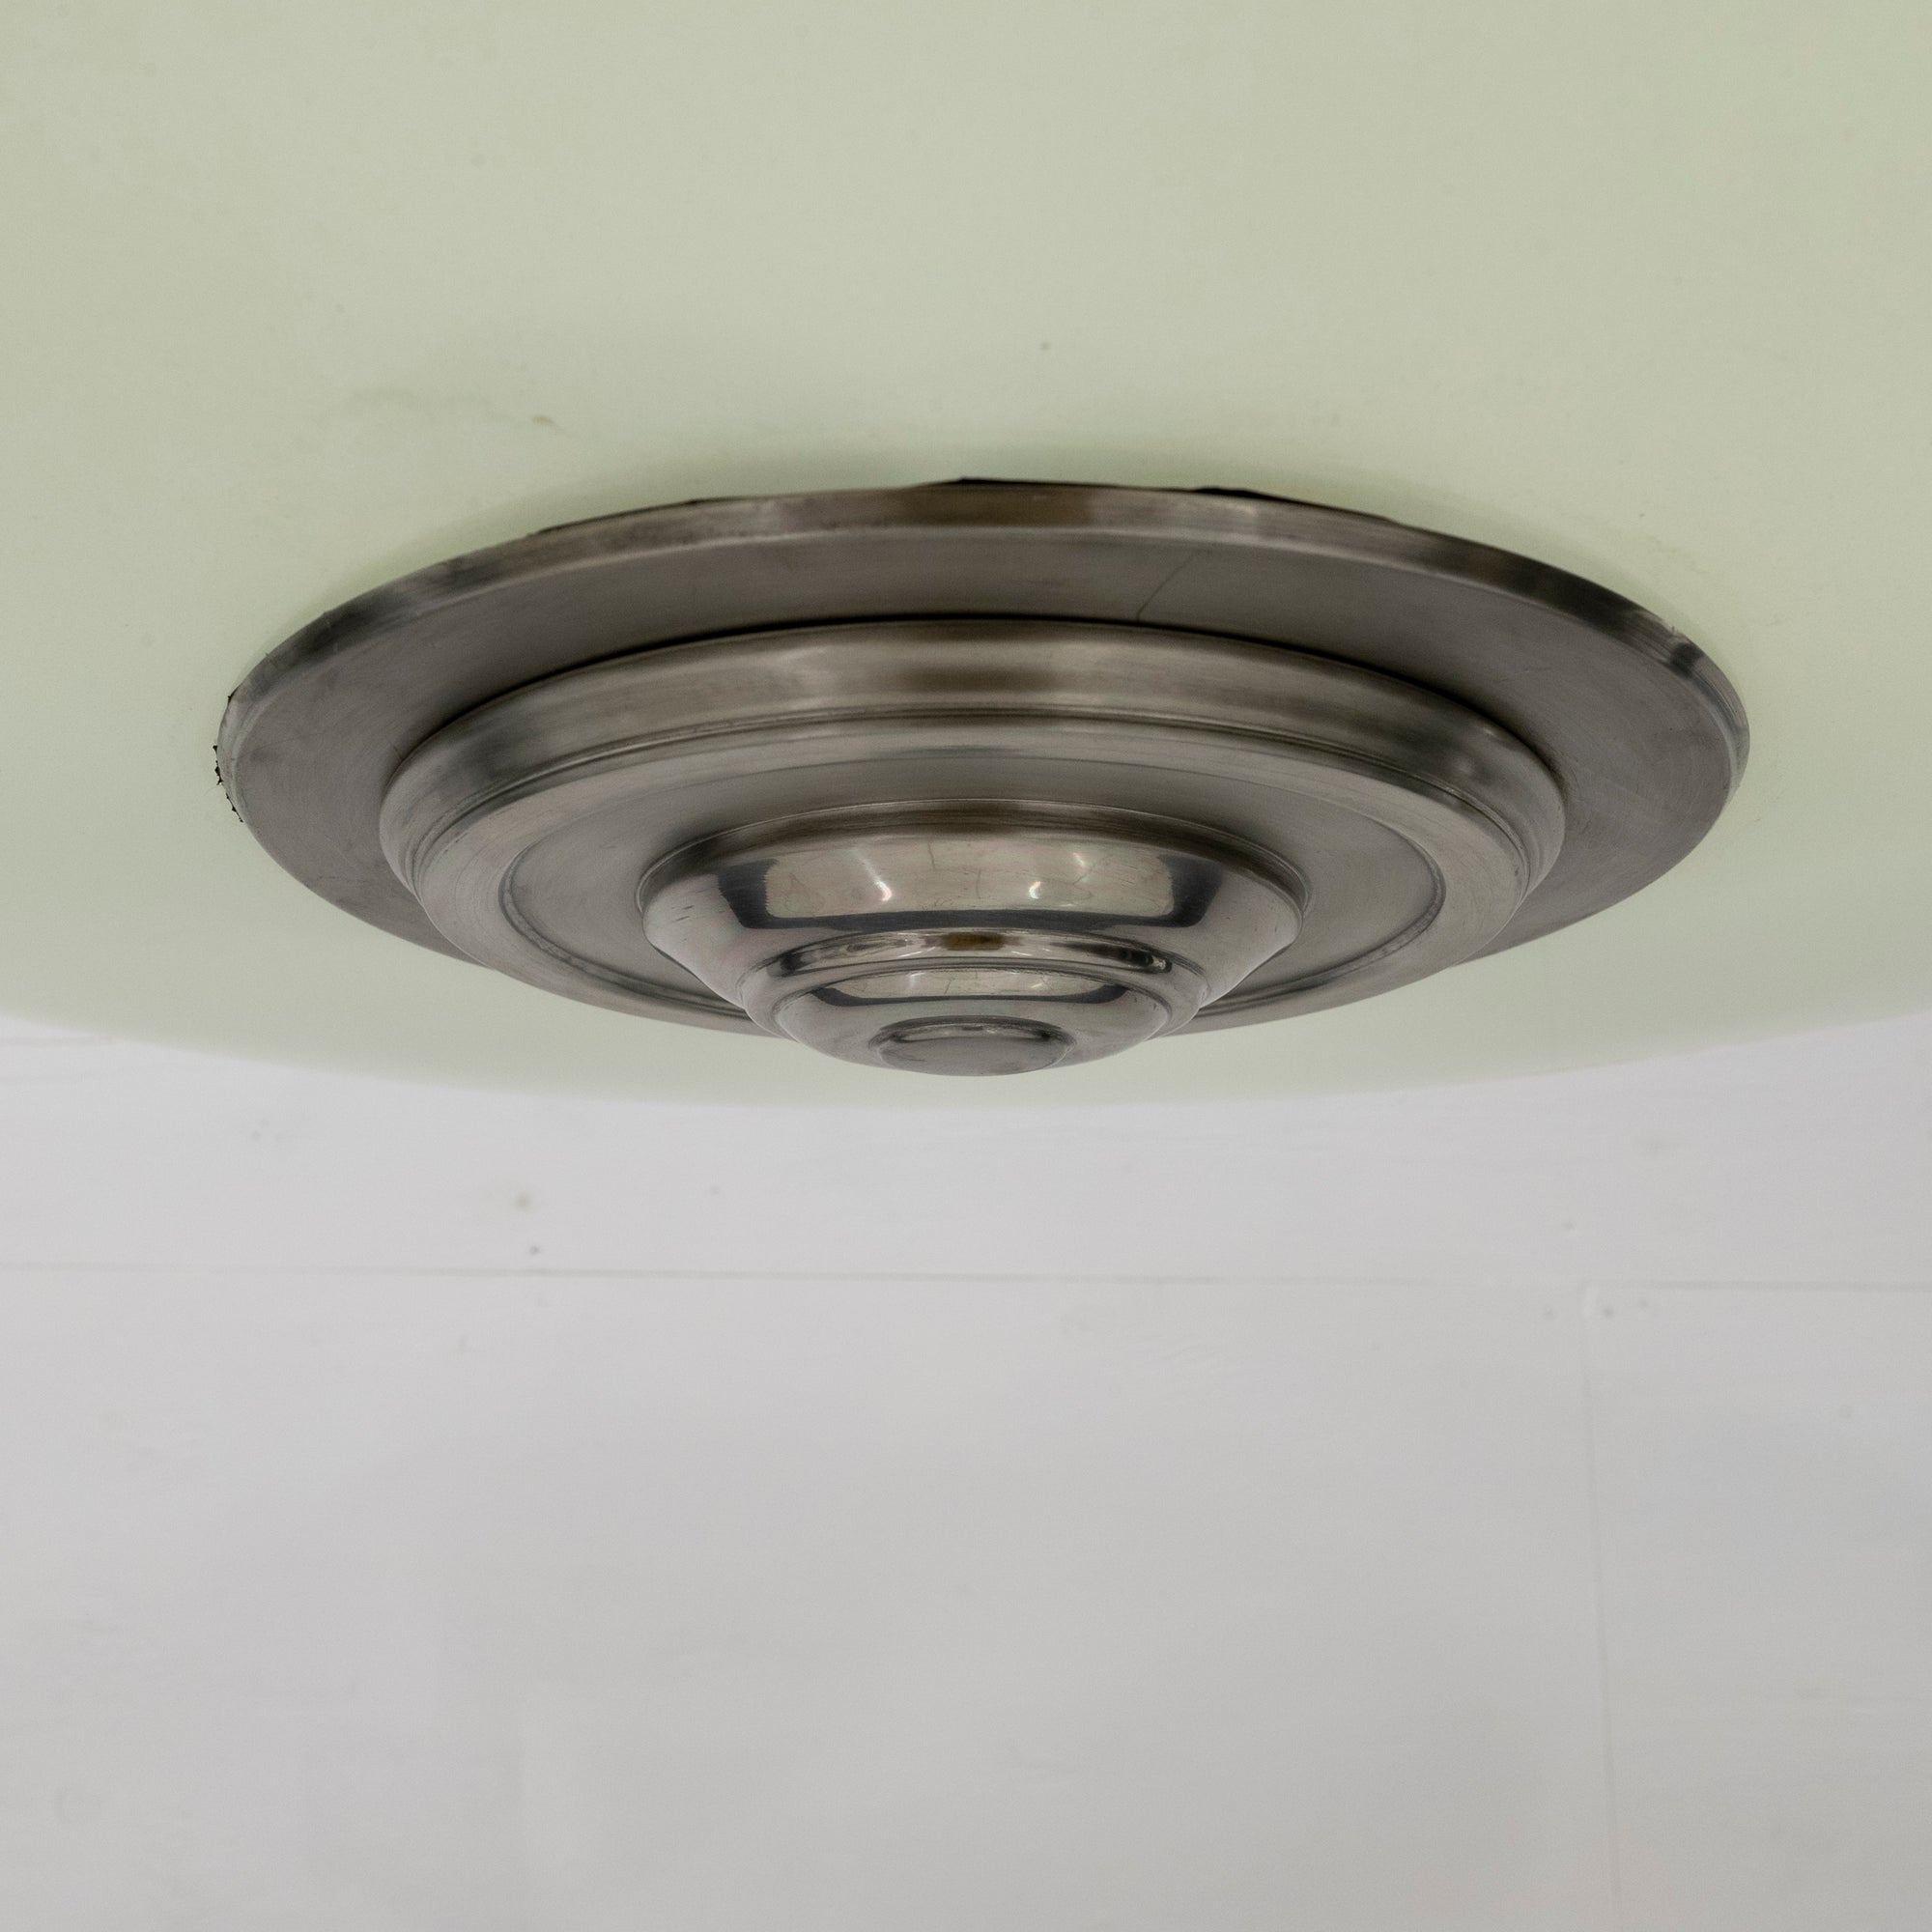 Reclaimed Large Art Deco Glass Ceiling Light - 10 Available | The Architectural Forum